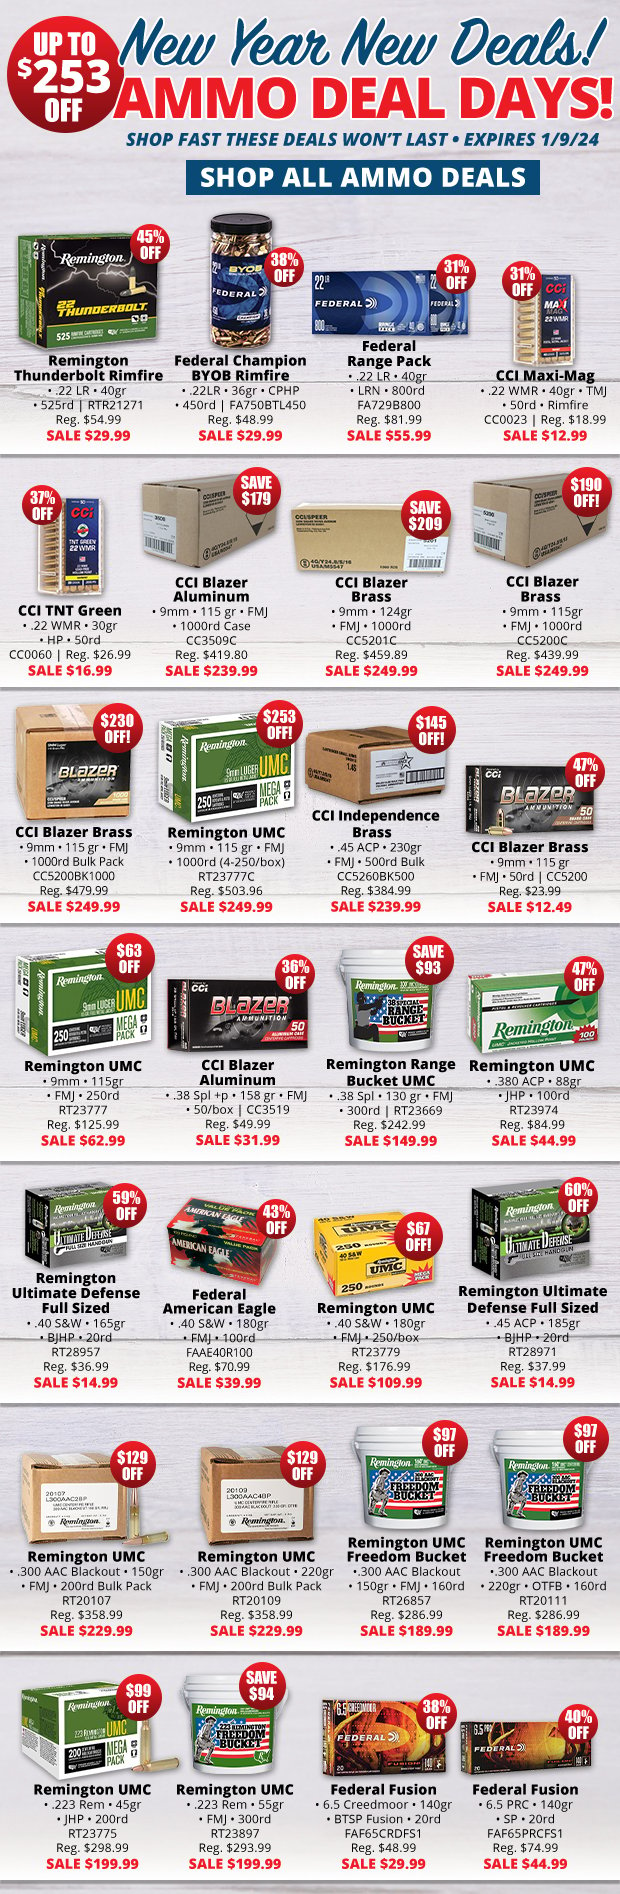 Up to $253 in Ammo Day Deals!